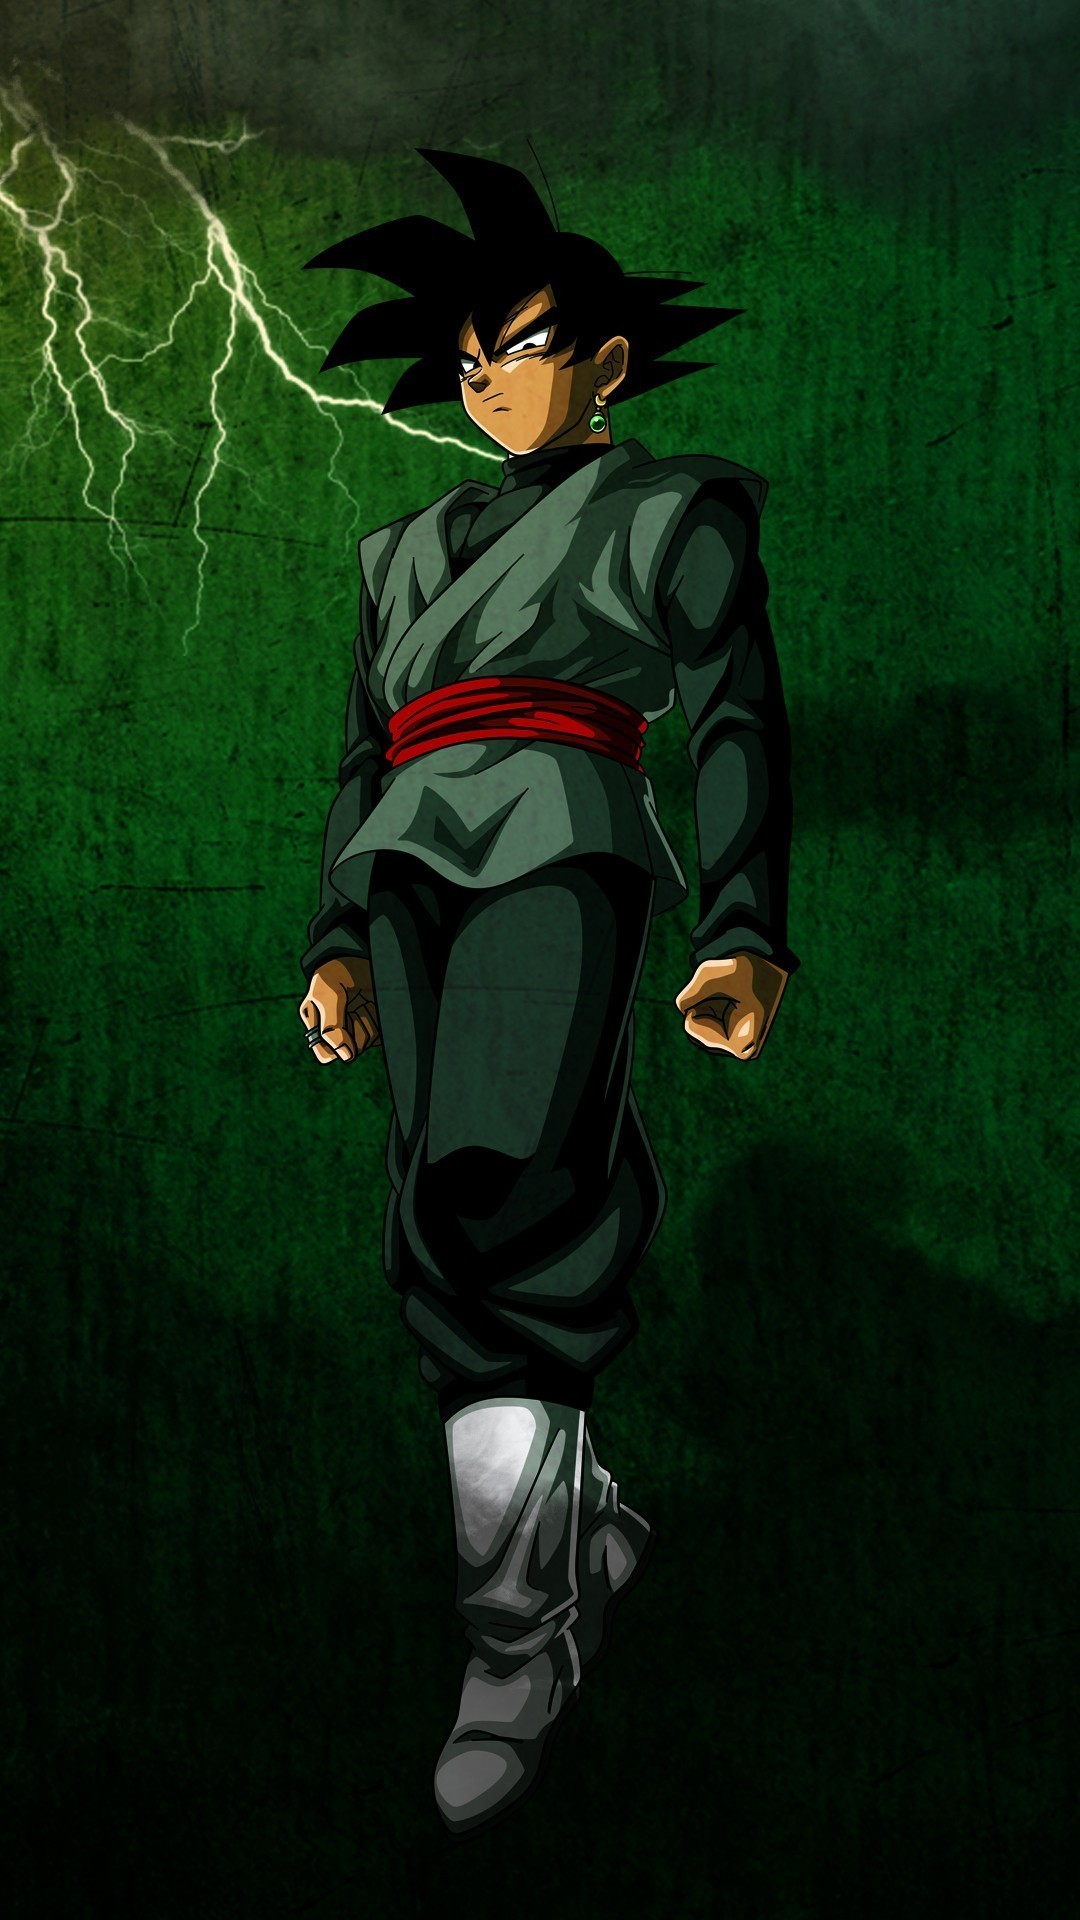 1080x1920 iPhone 7 Wallpaper Black Goku with image resolution  pixel. You  can make this wallpaper